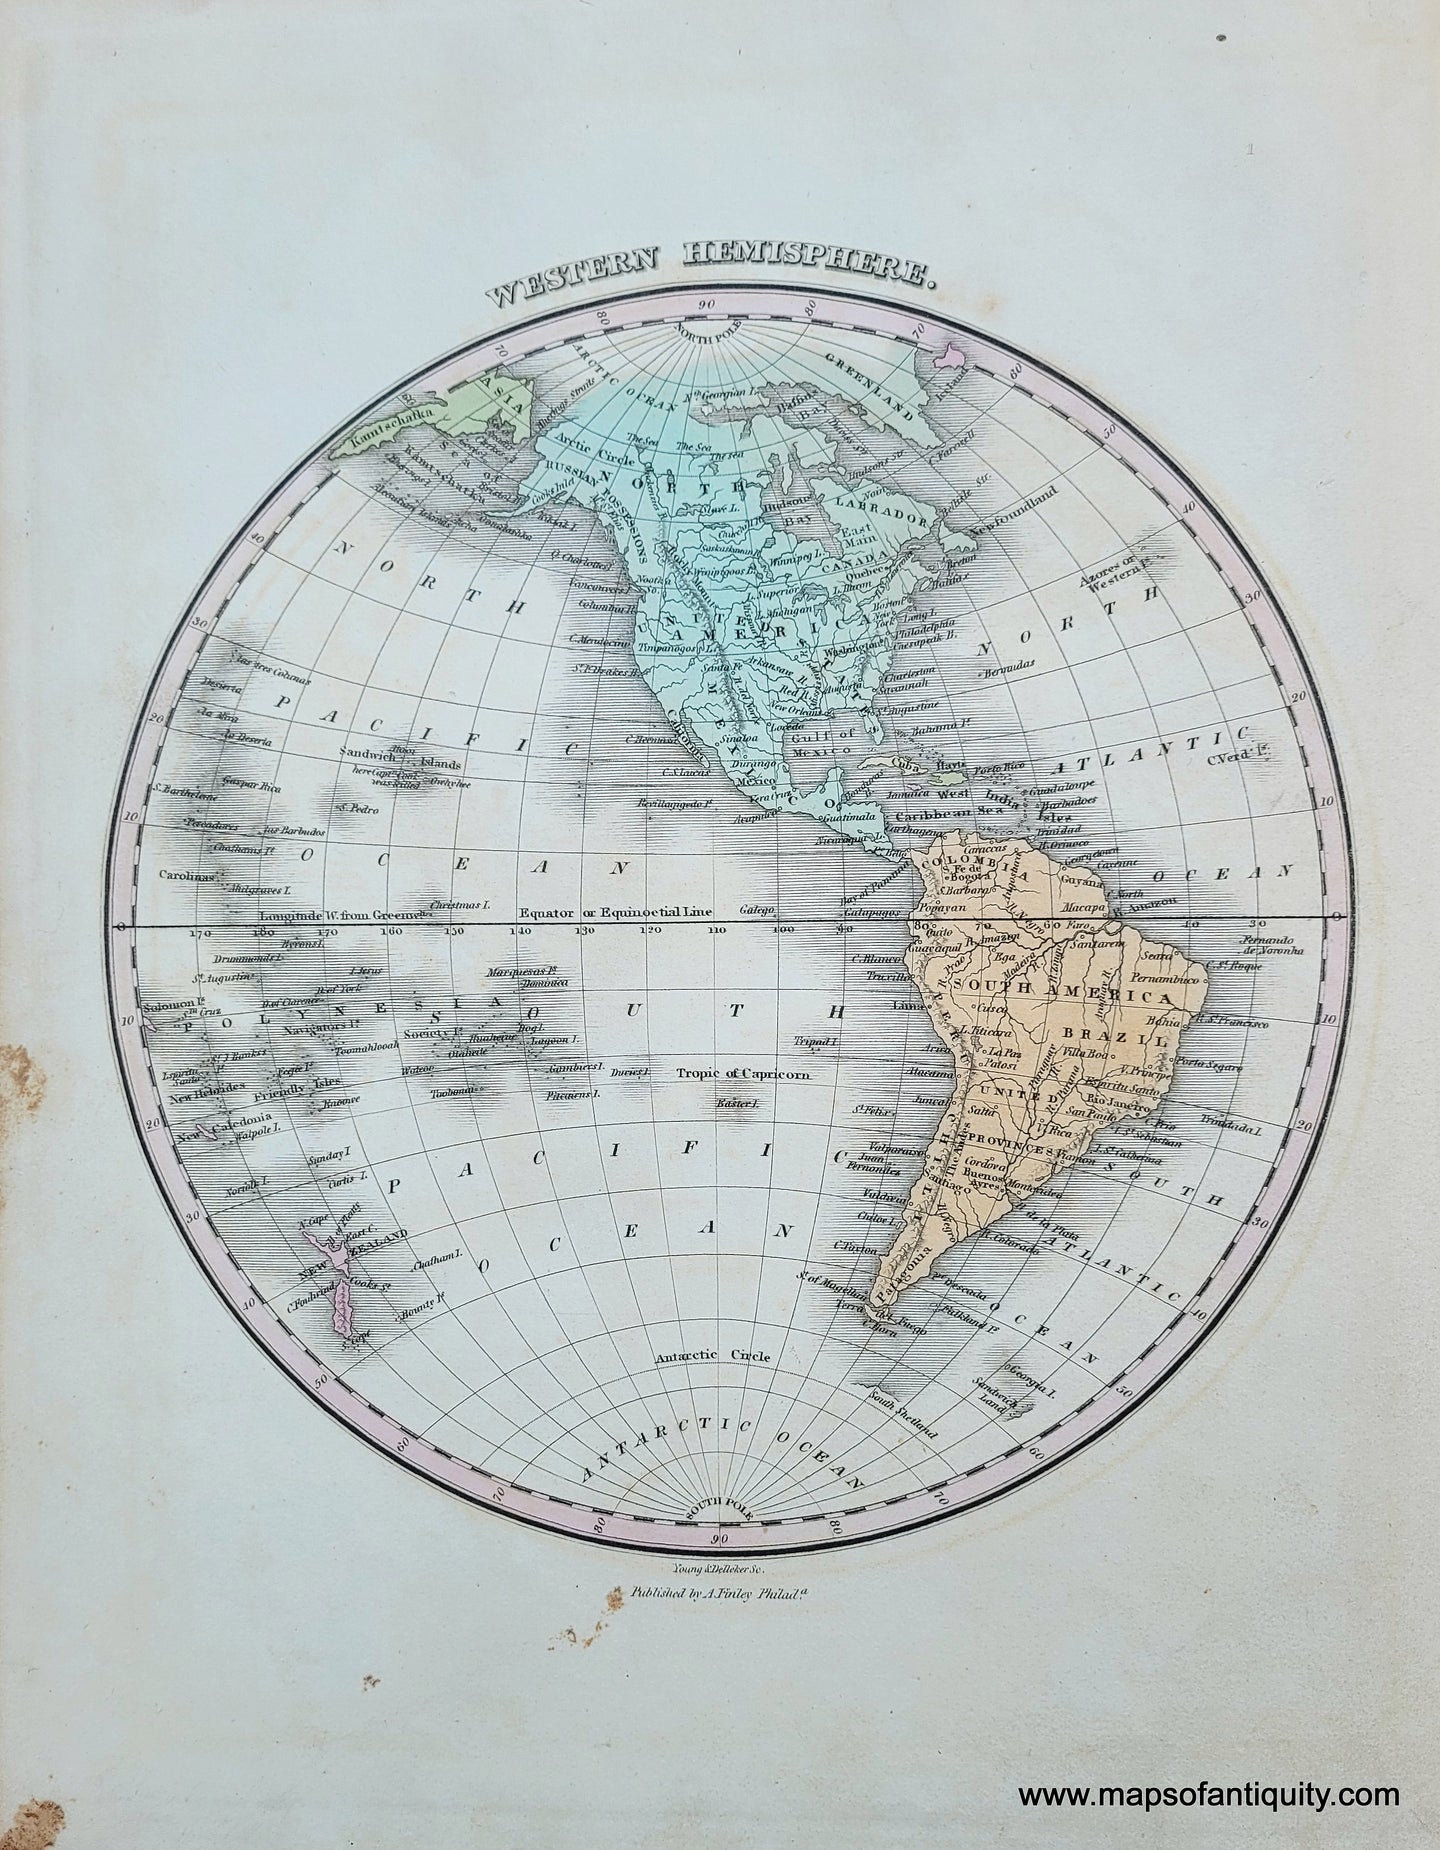 Antique-Map-Western-Hemisphere-1824-Finley-1820s-1800s-19th-century-world-map-maps-of-antiquity